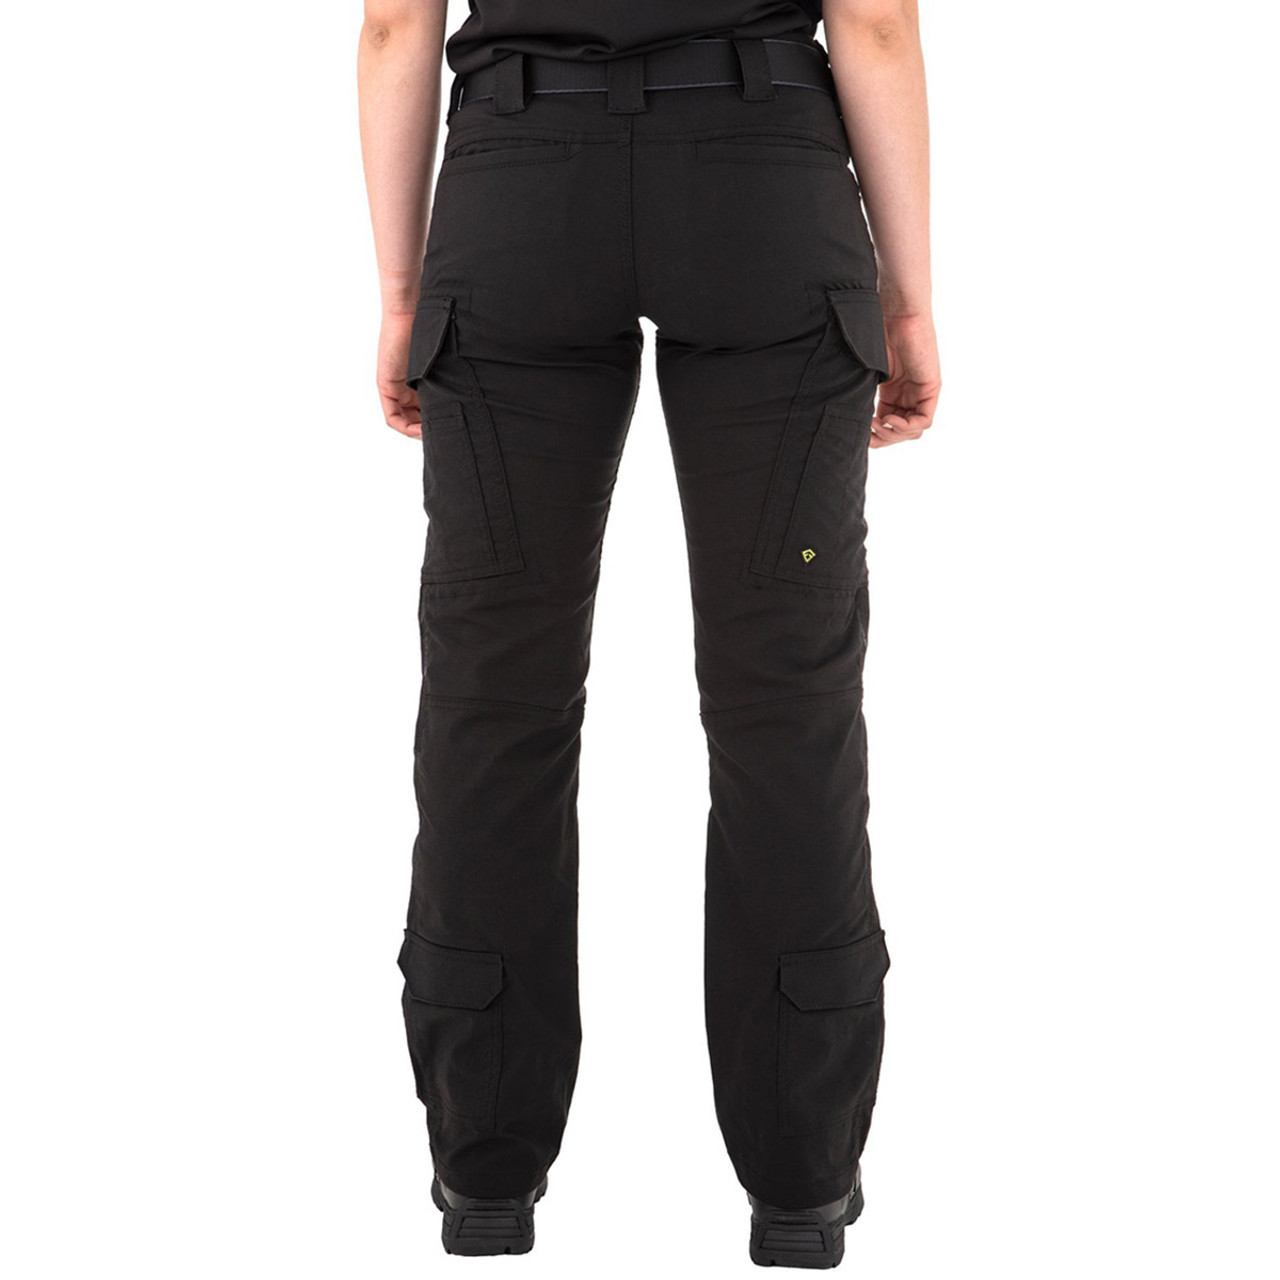 Women's V2 Tactical Pants – First Tactical